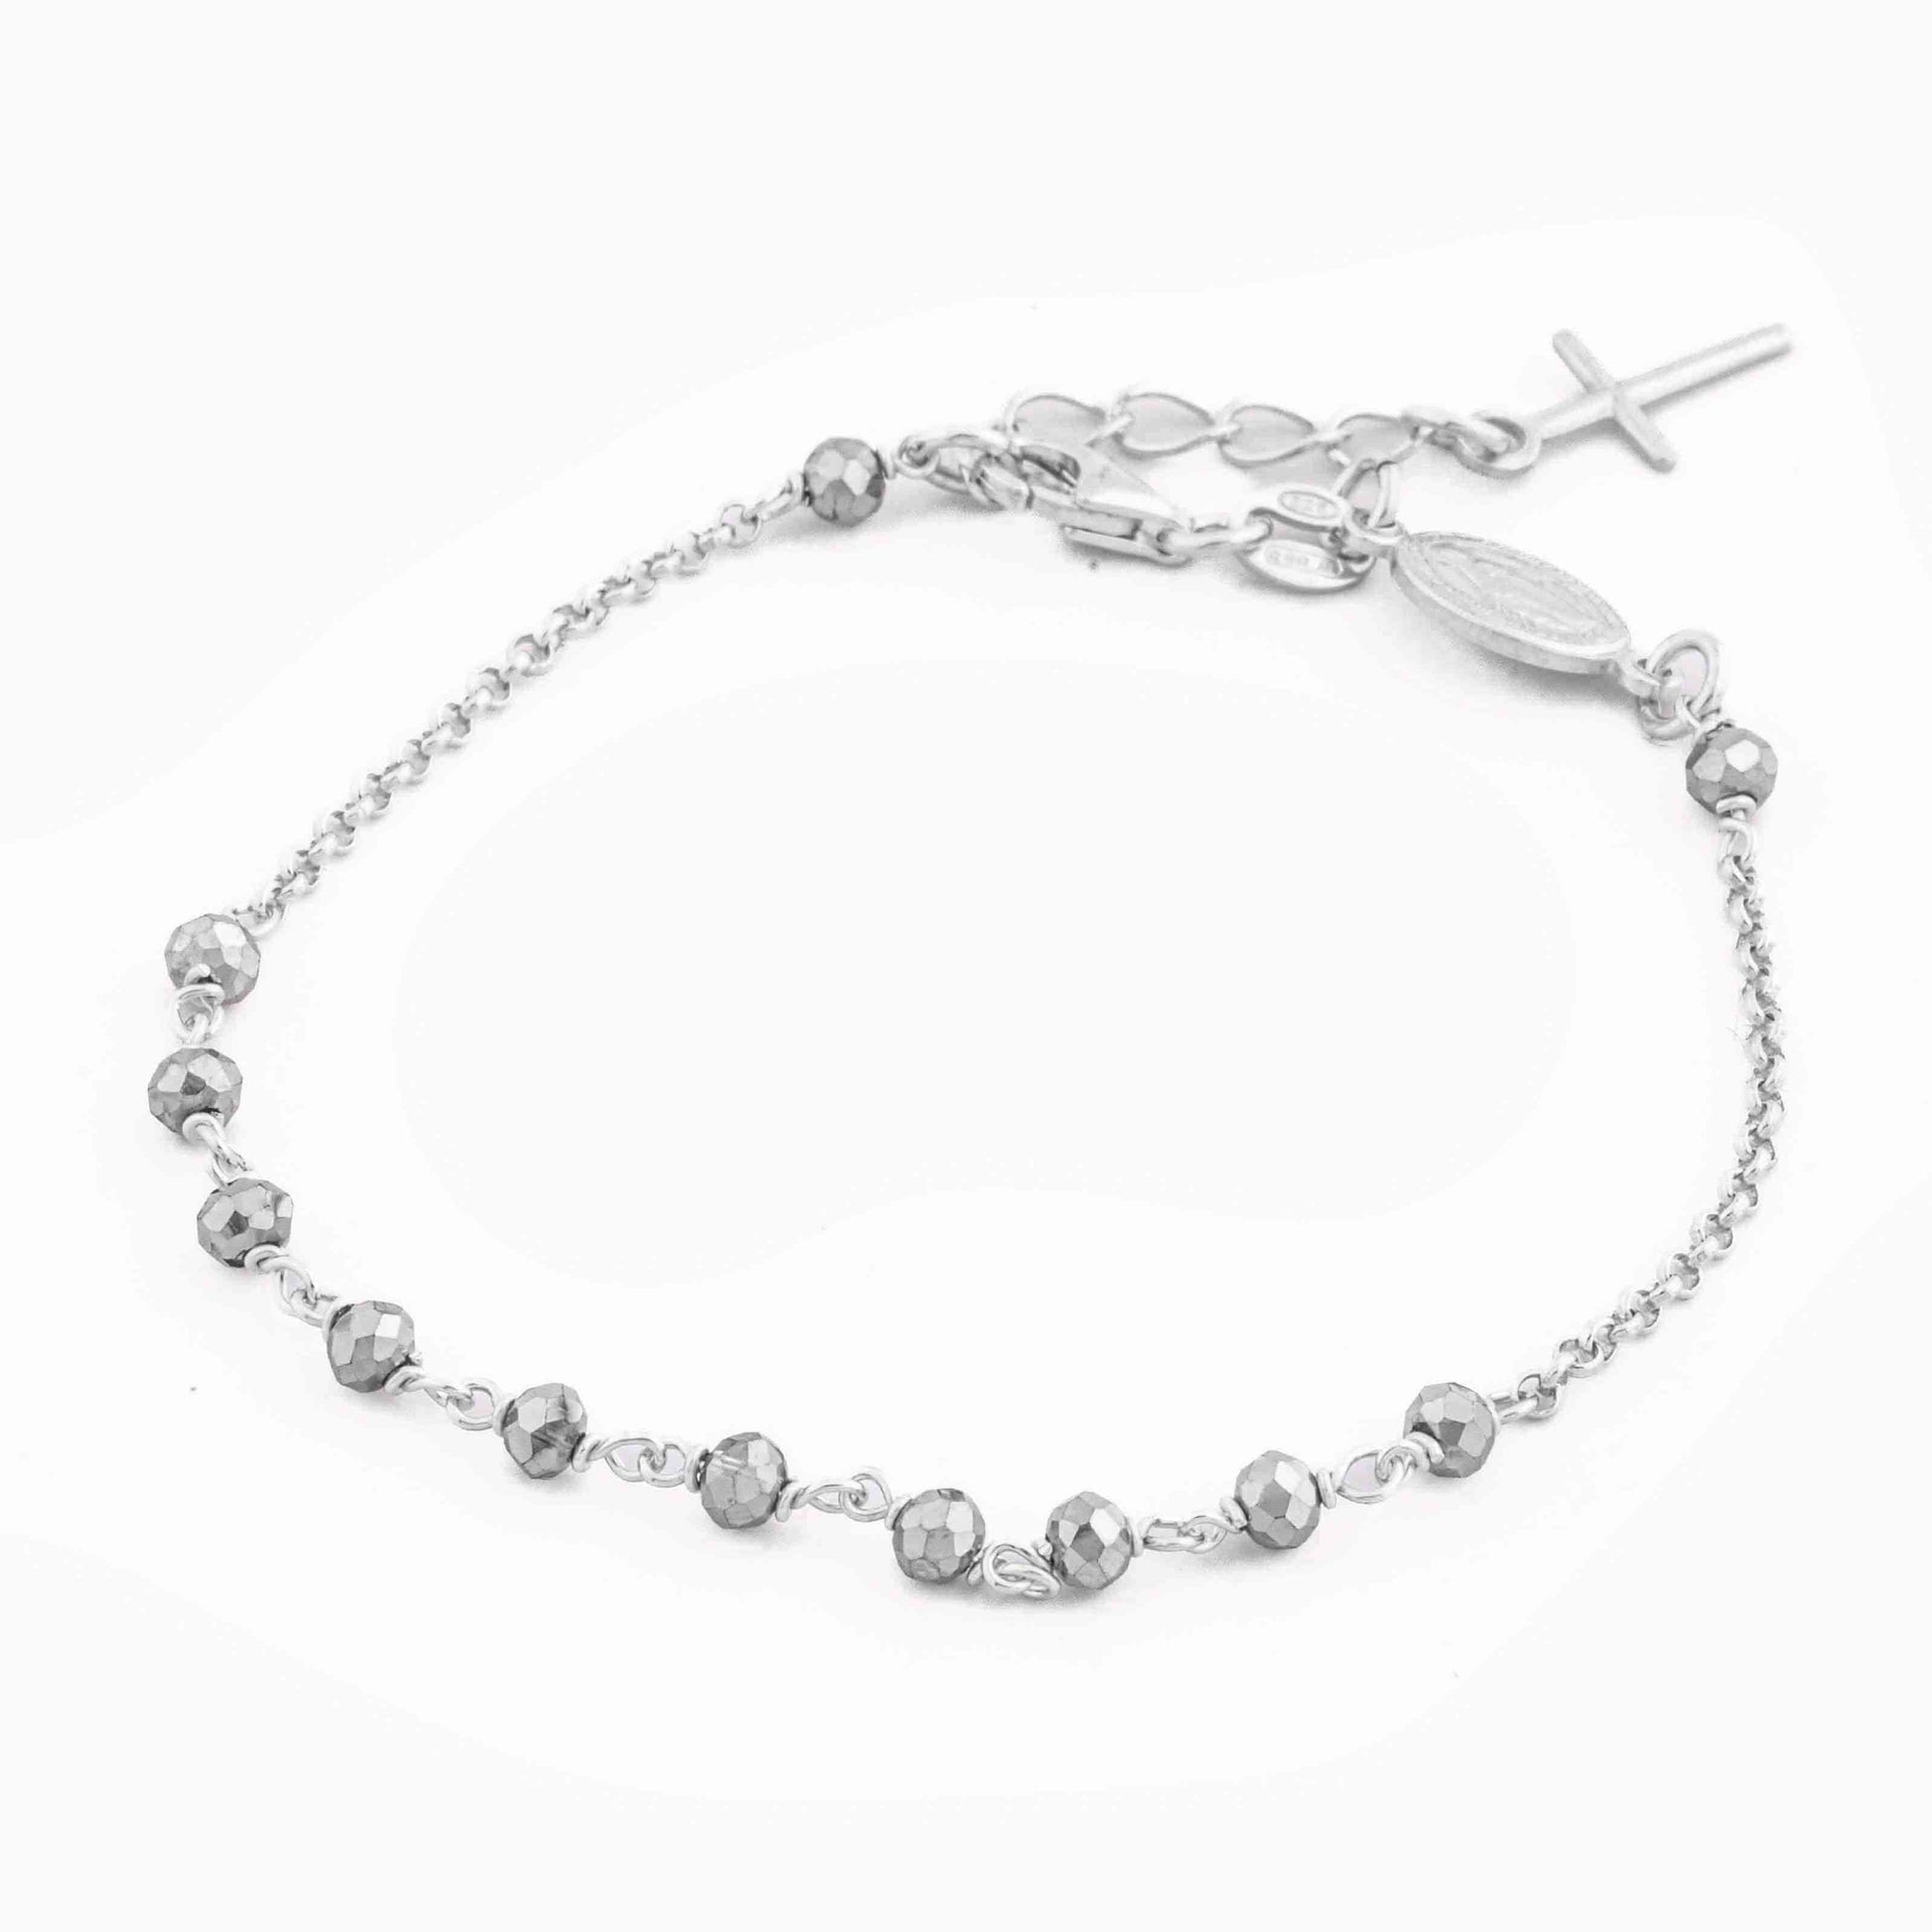 MONDO CATTOLICO Prayer Beads Rhodium and Grey / Cm 17.5 ( 6.9 in) STERLING SILVER ROSARY BRACELET WITH MIRACULOUS MEDAL AND CROSS FACETED BEADS